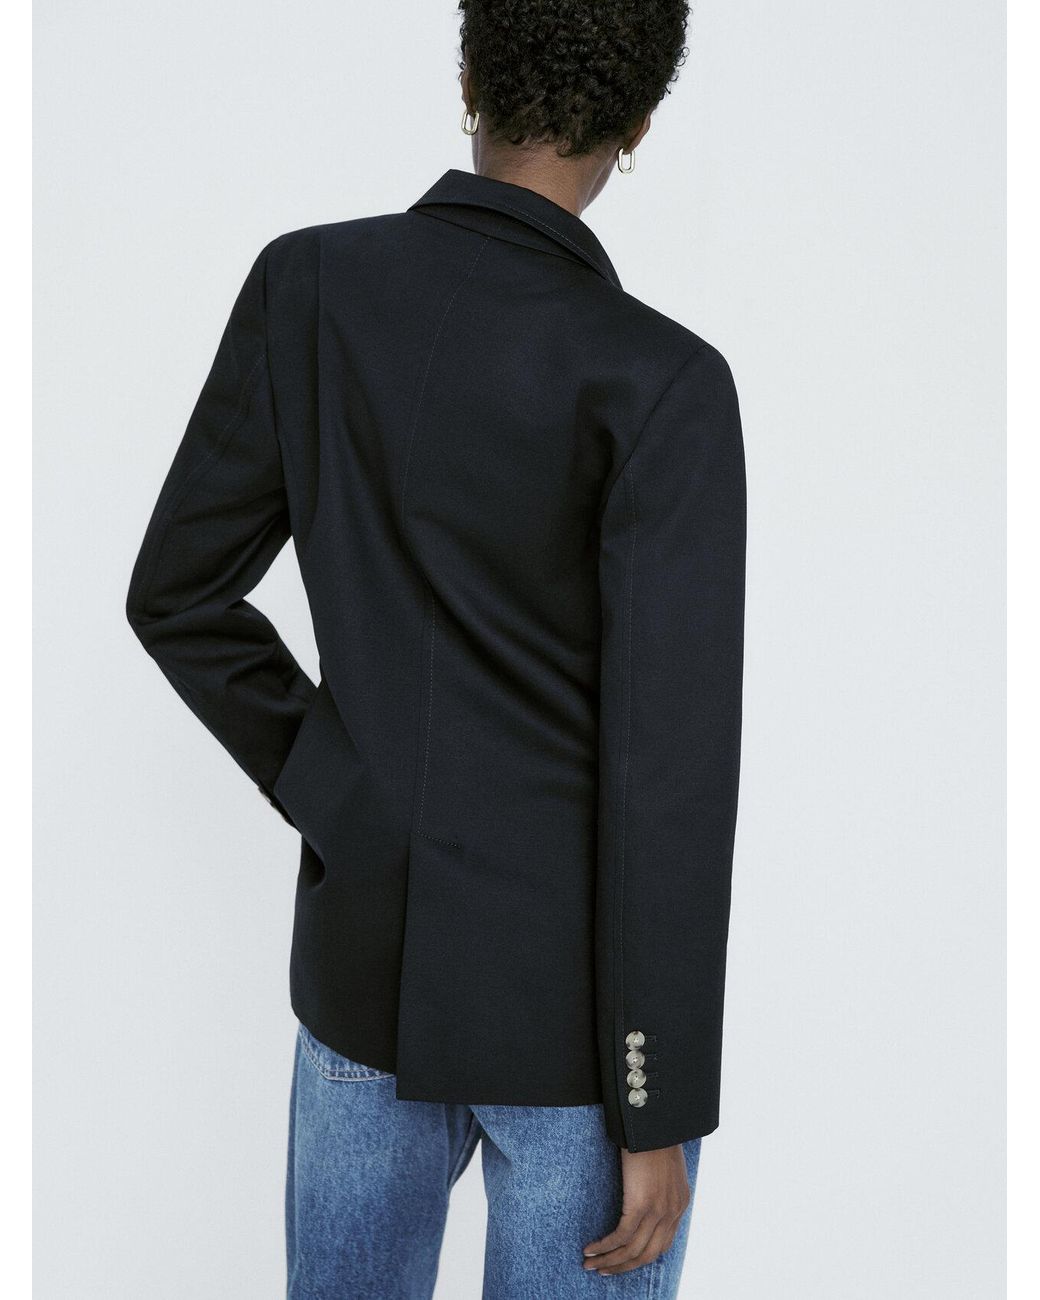 MASSIMO DUTTI Double-breasted Blazer In A Cotton And Linen Blend in Black |  Lyst